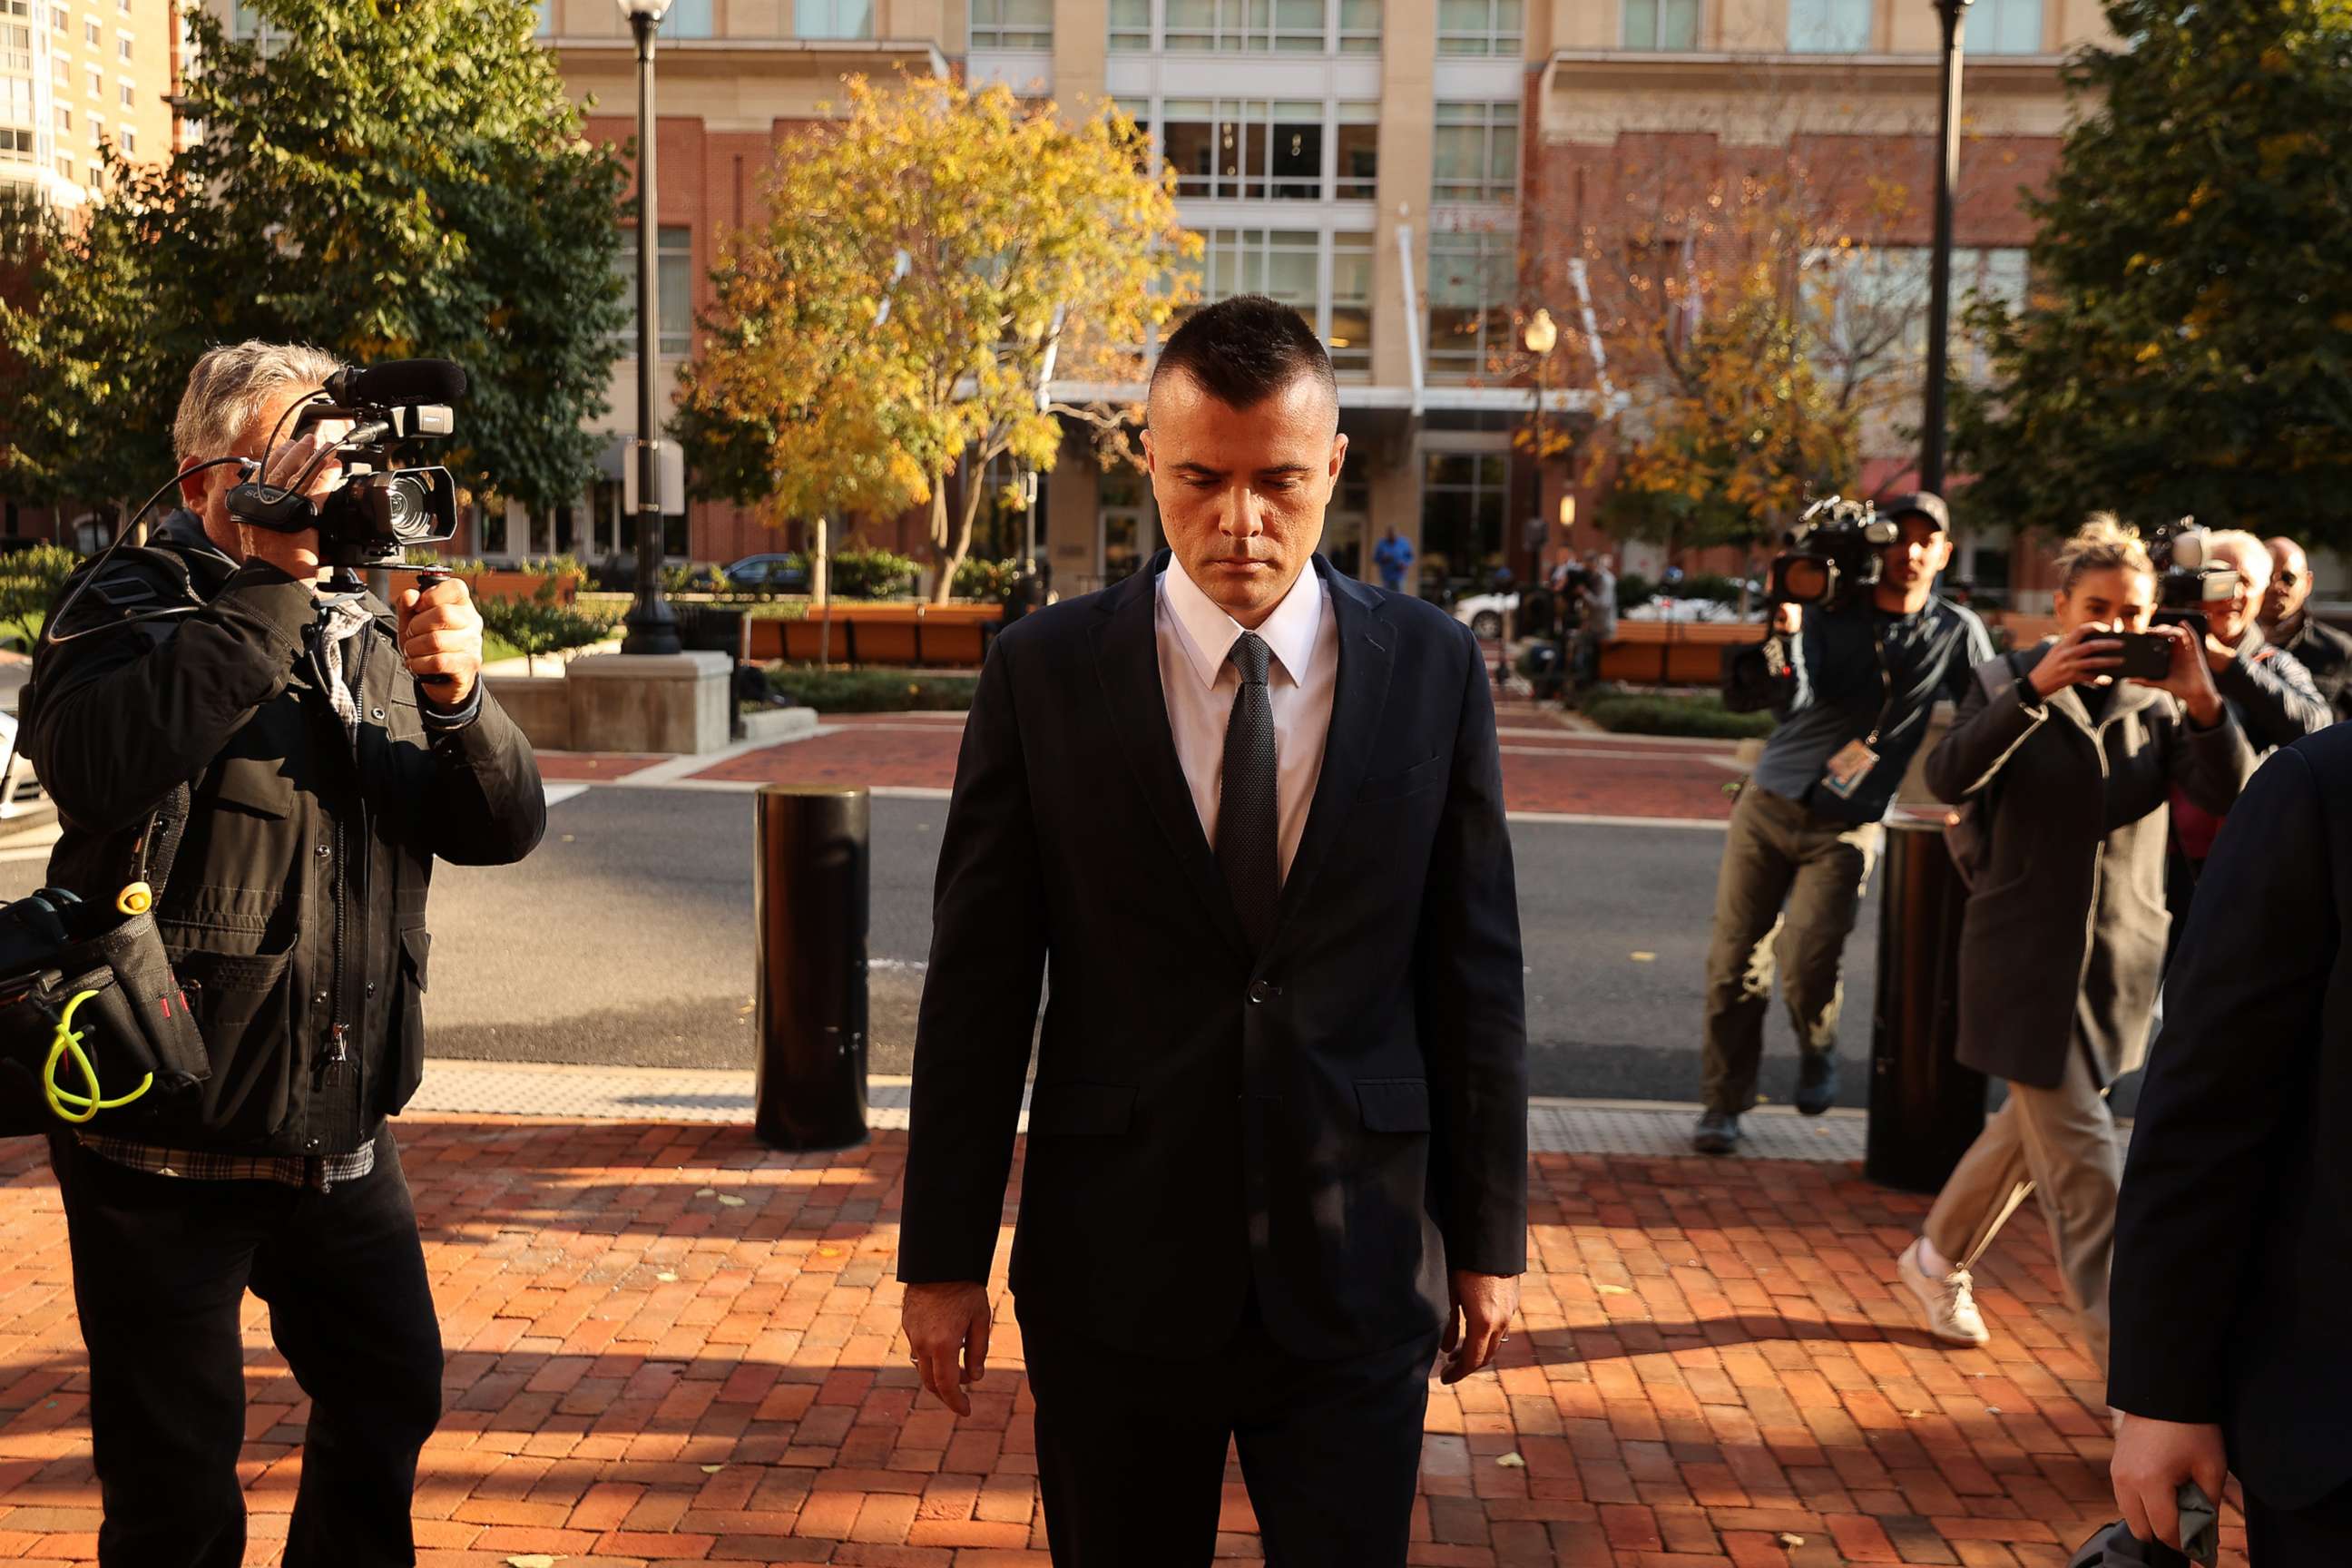 PHOTO: Russian analyst Igor Danchenko arrives at the Albert V. Bryan U.S. Courthouse before being arraigned on Nov. 10, 2021, in Alexandria, Va.